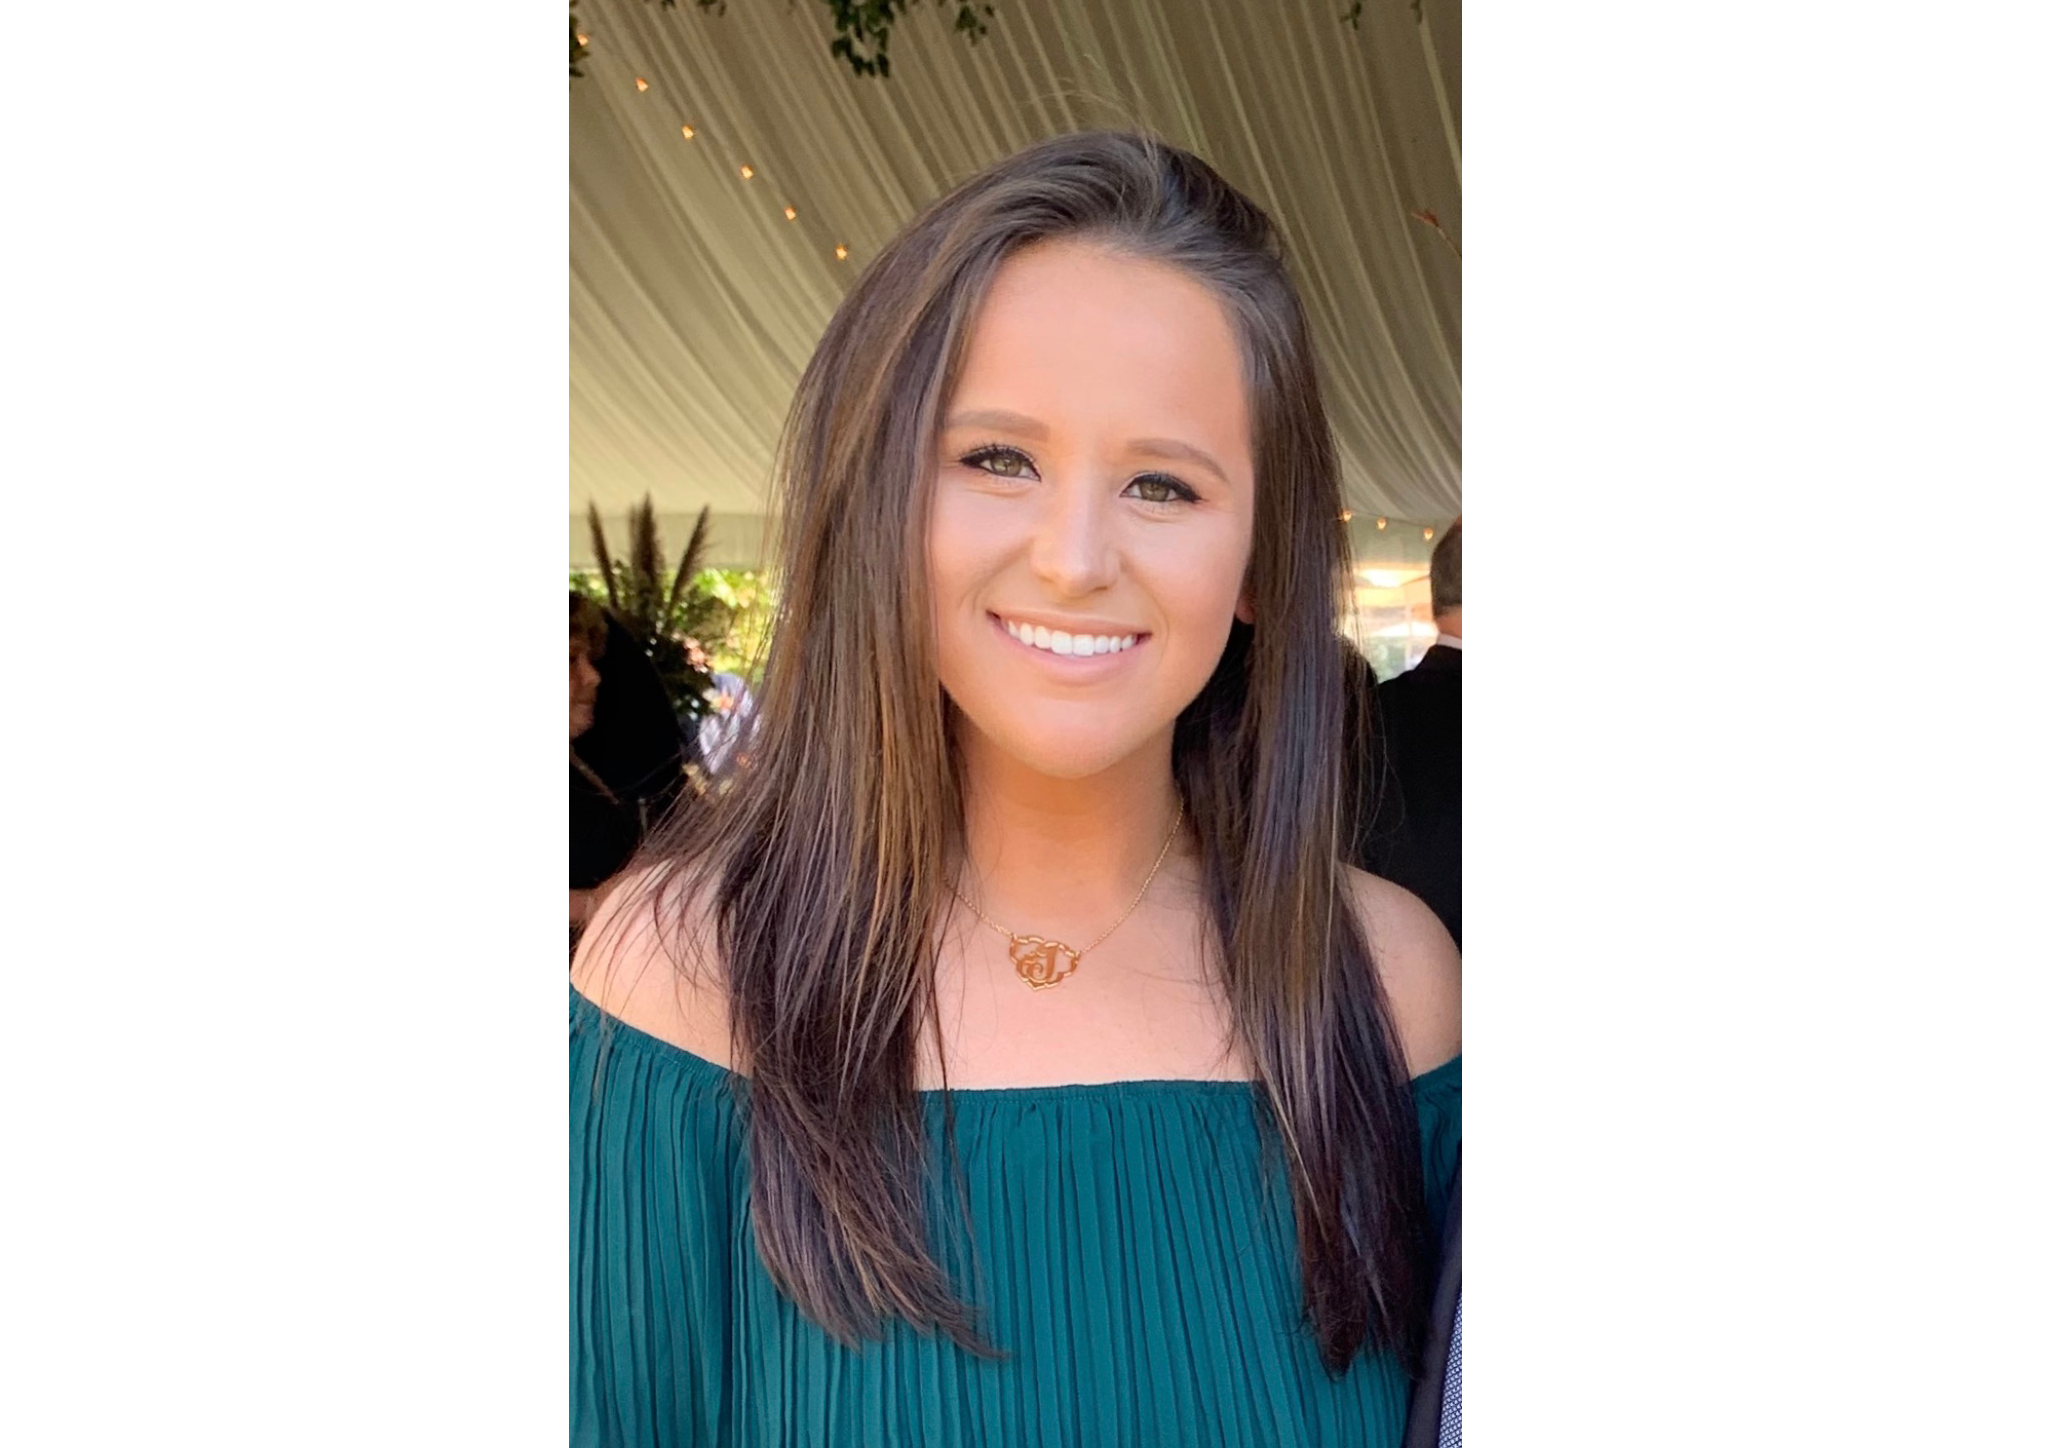 VIZpin Welcomes Jenna Turnbull as Customer Experience Specialist featured image